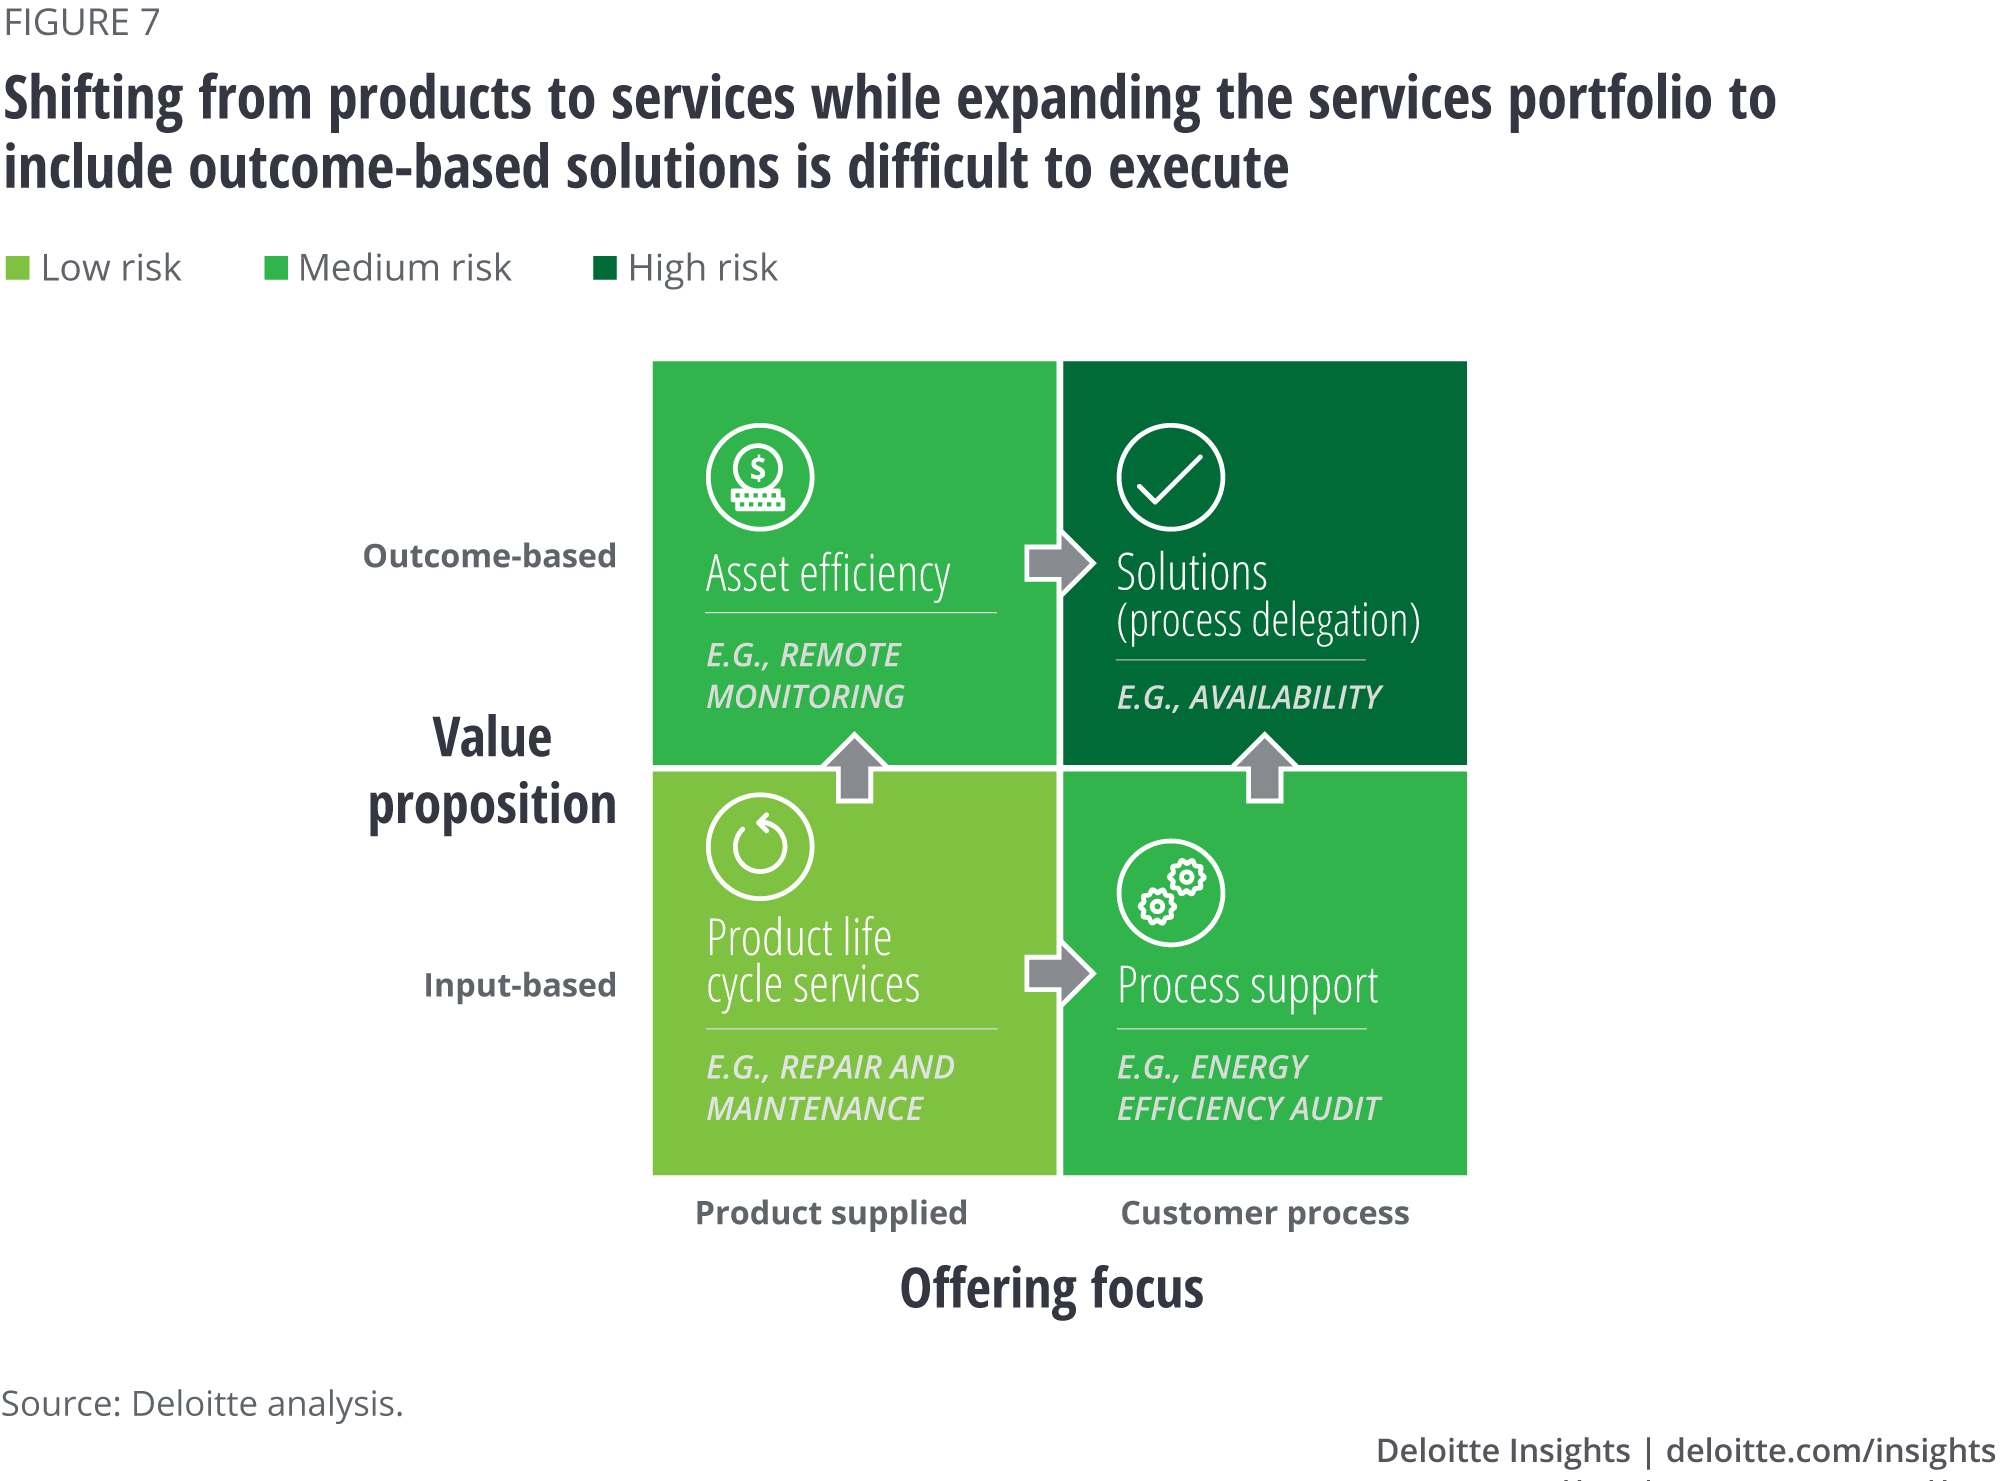 Shifting from products to services while expanding the services portfolio to include outcome-based solutions is difficult to execute